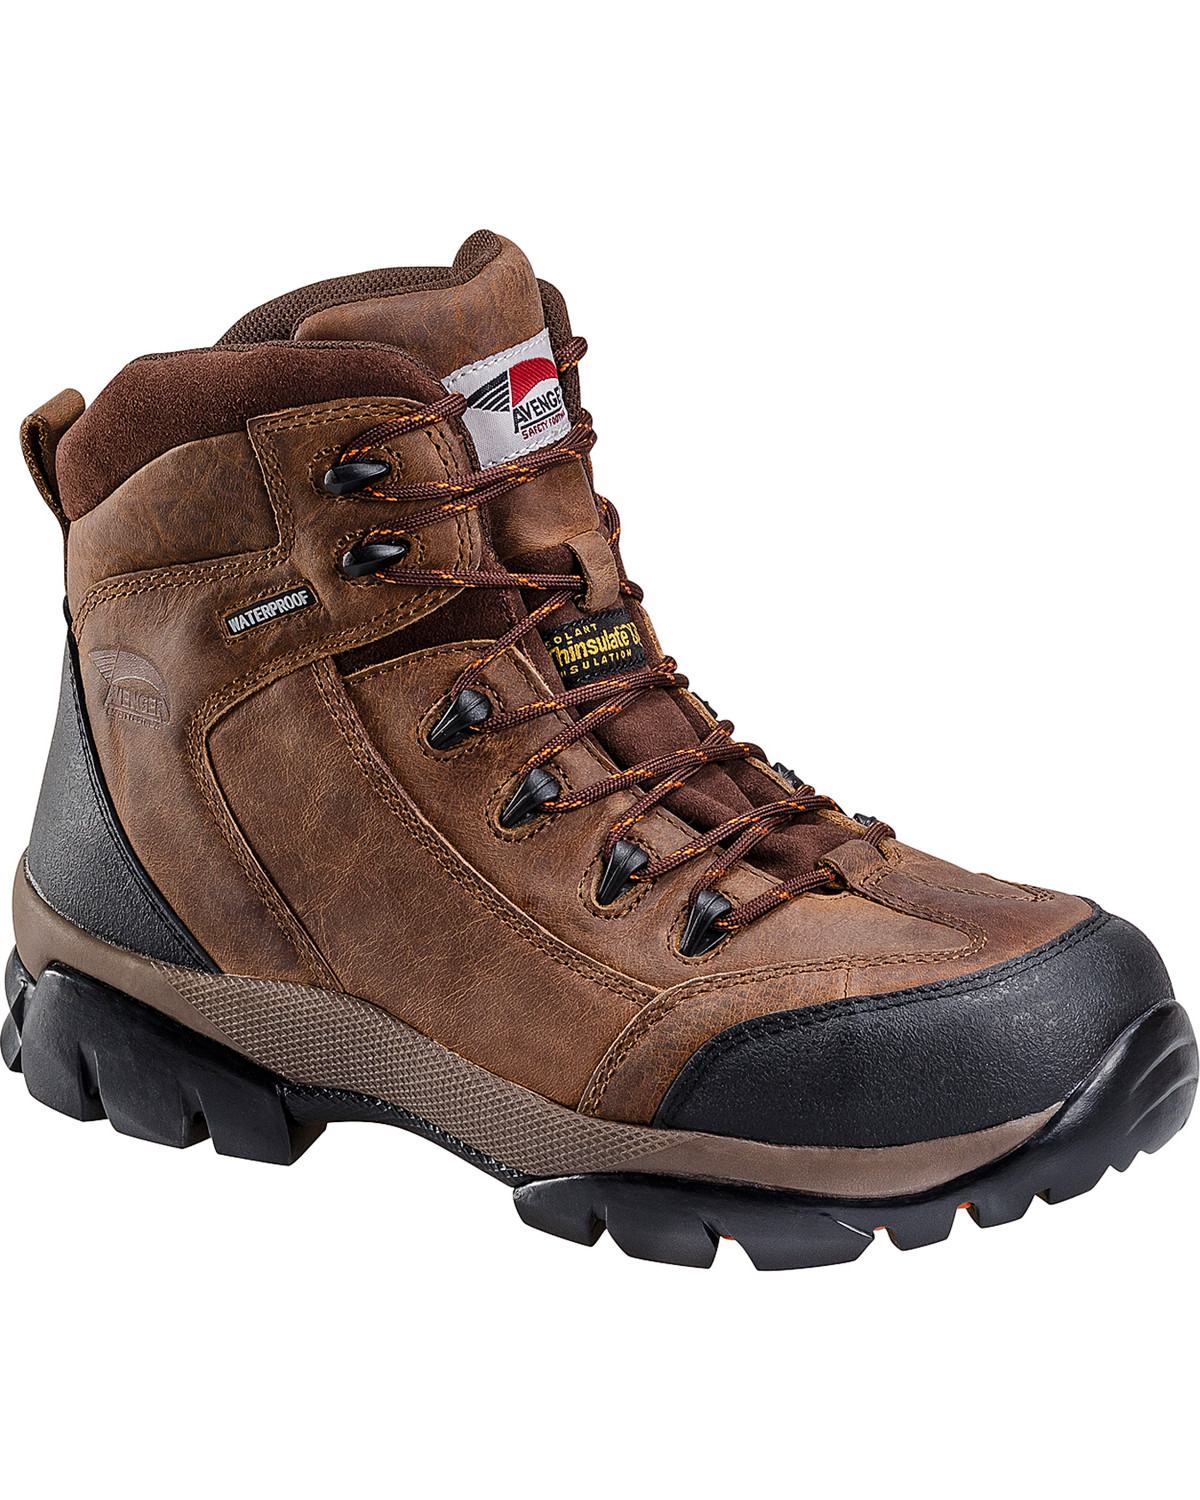 Avenger Men's Insulated Composite Toe Lace Up Work Boots